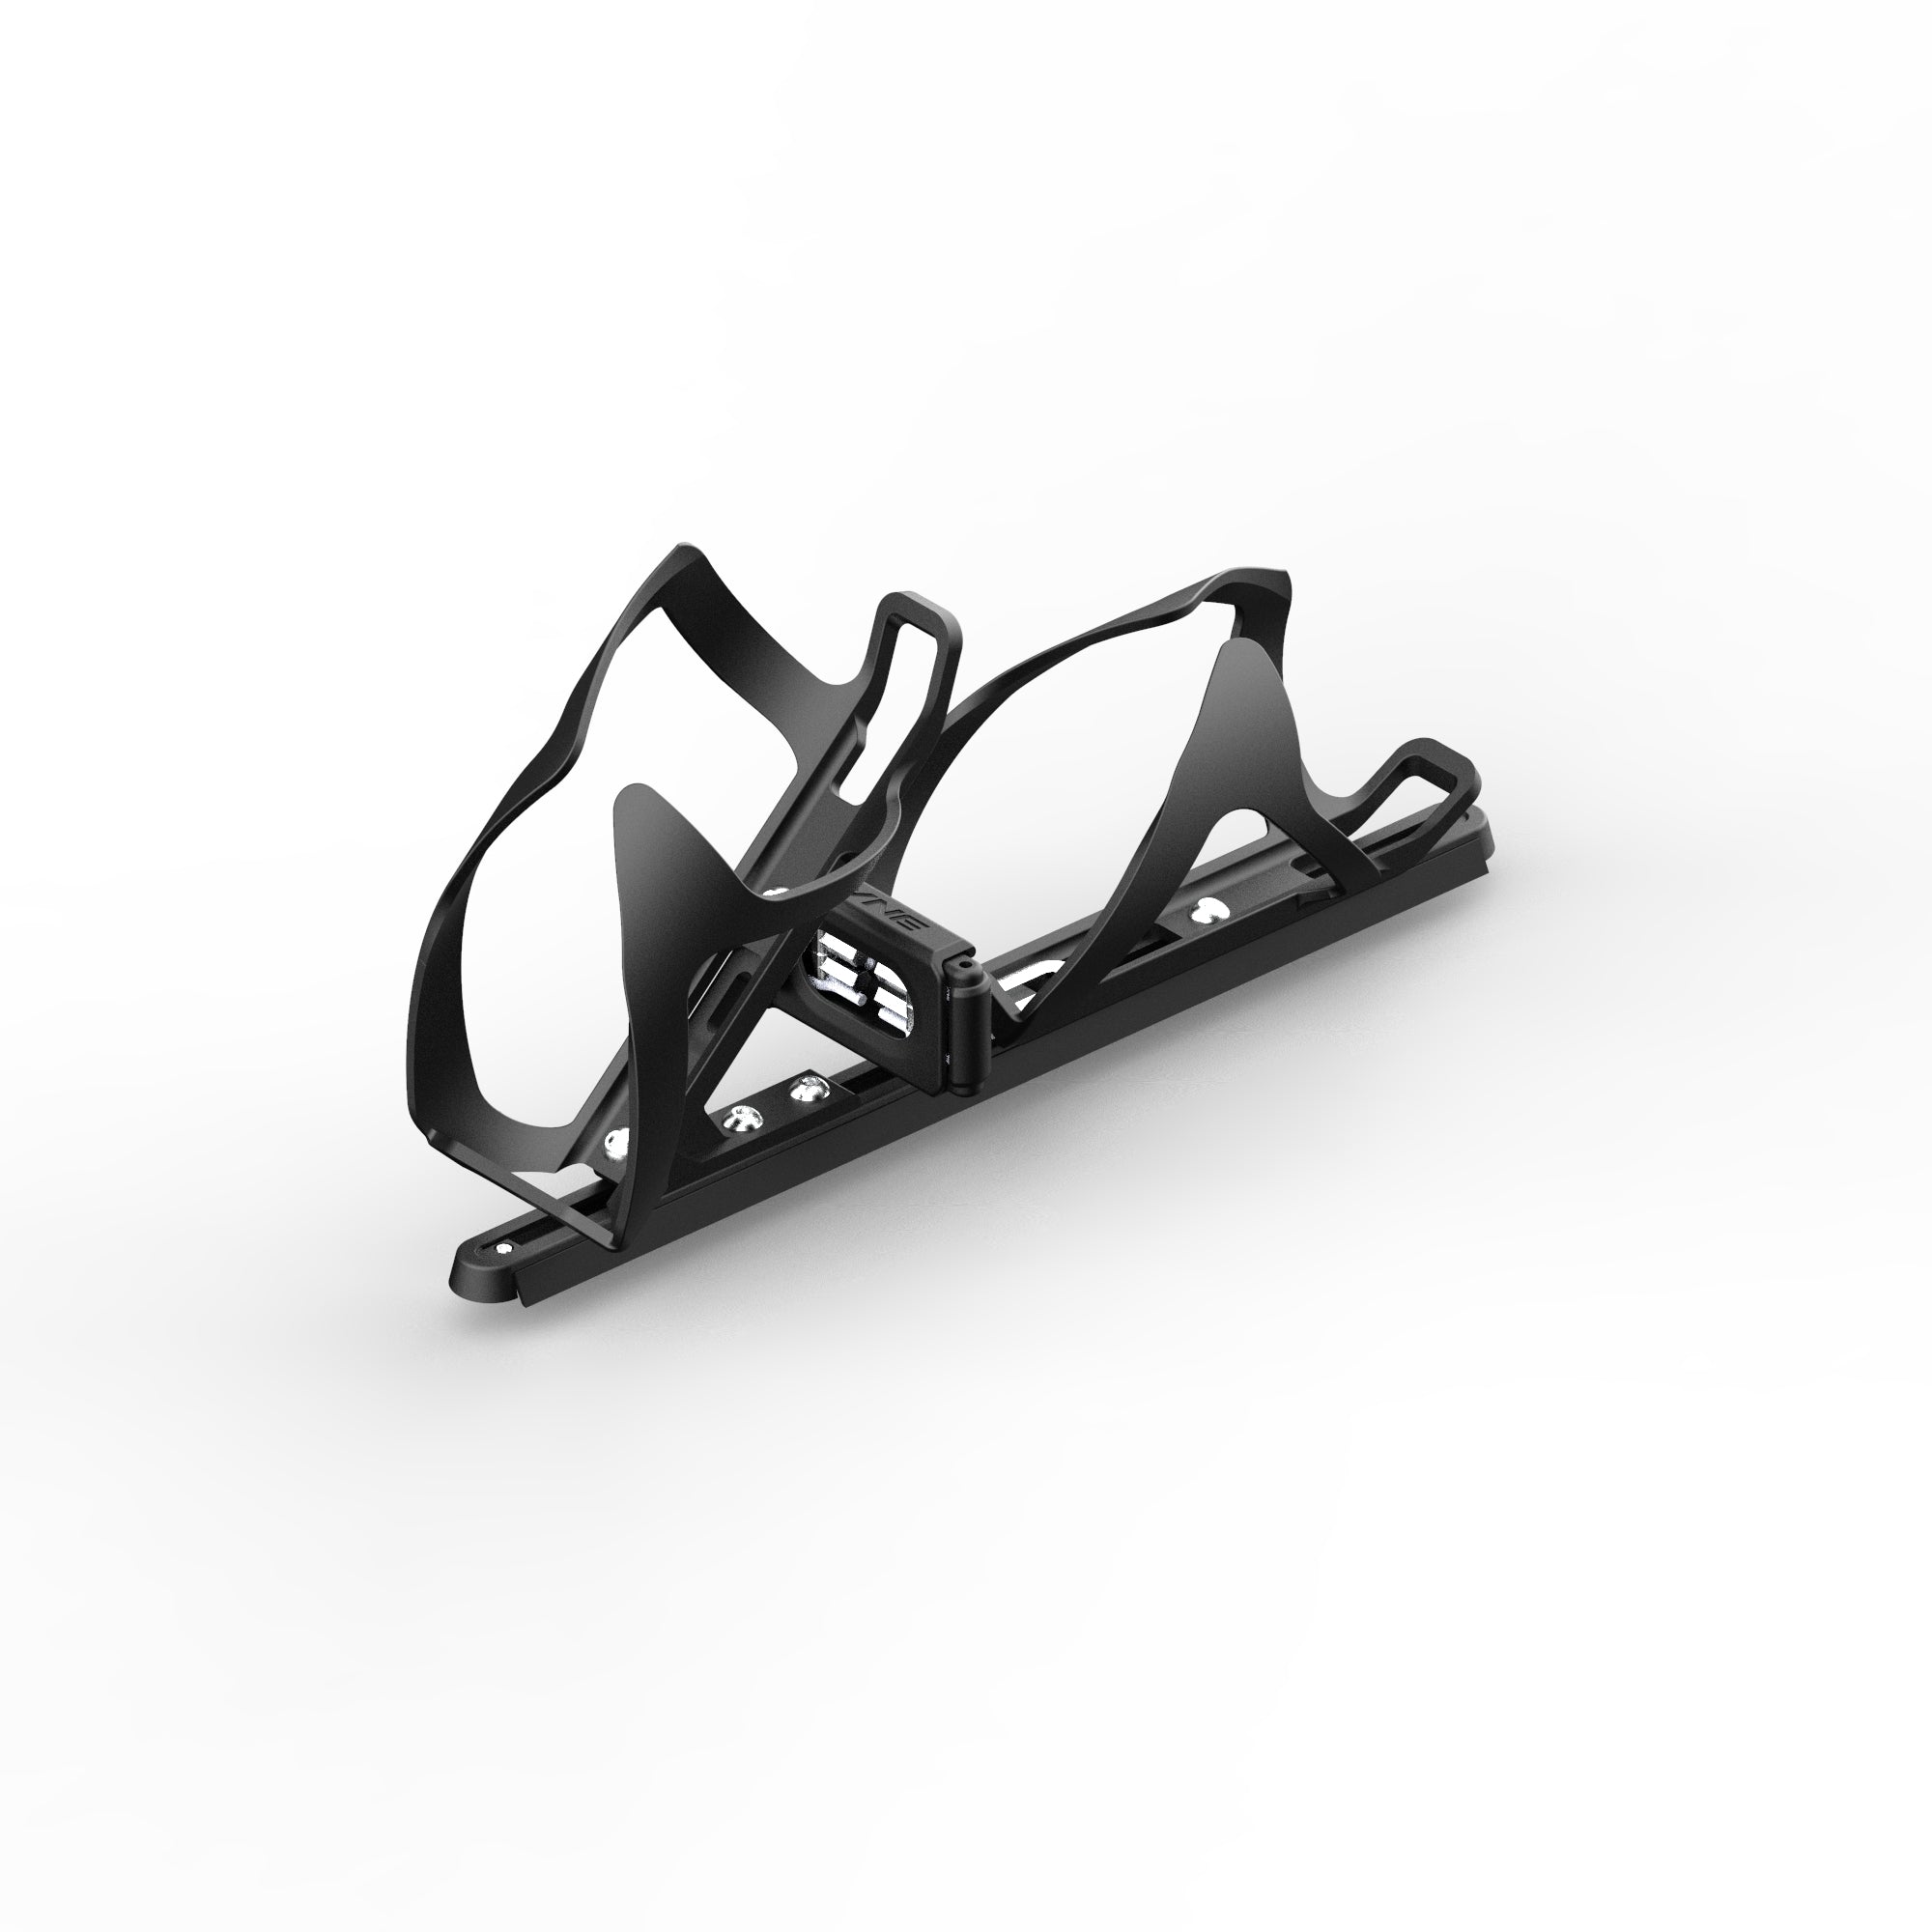 Holy Rail Dual Cage Kit + Quick-Draw Multitool